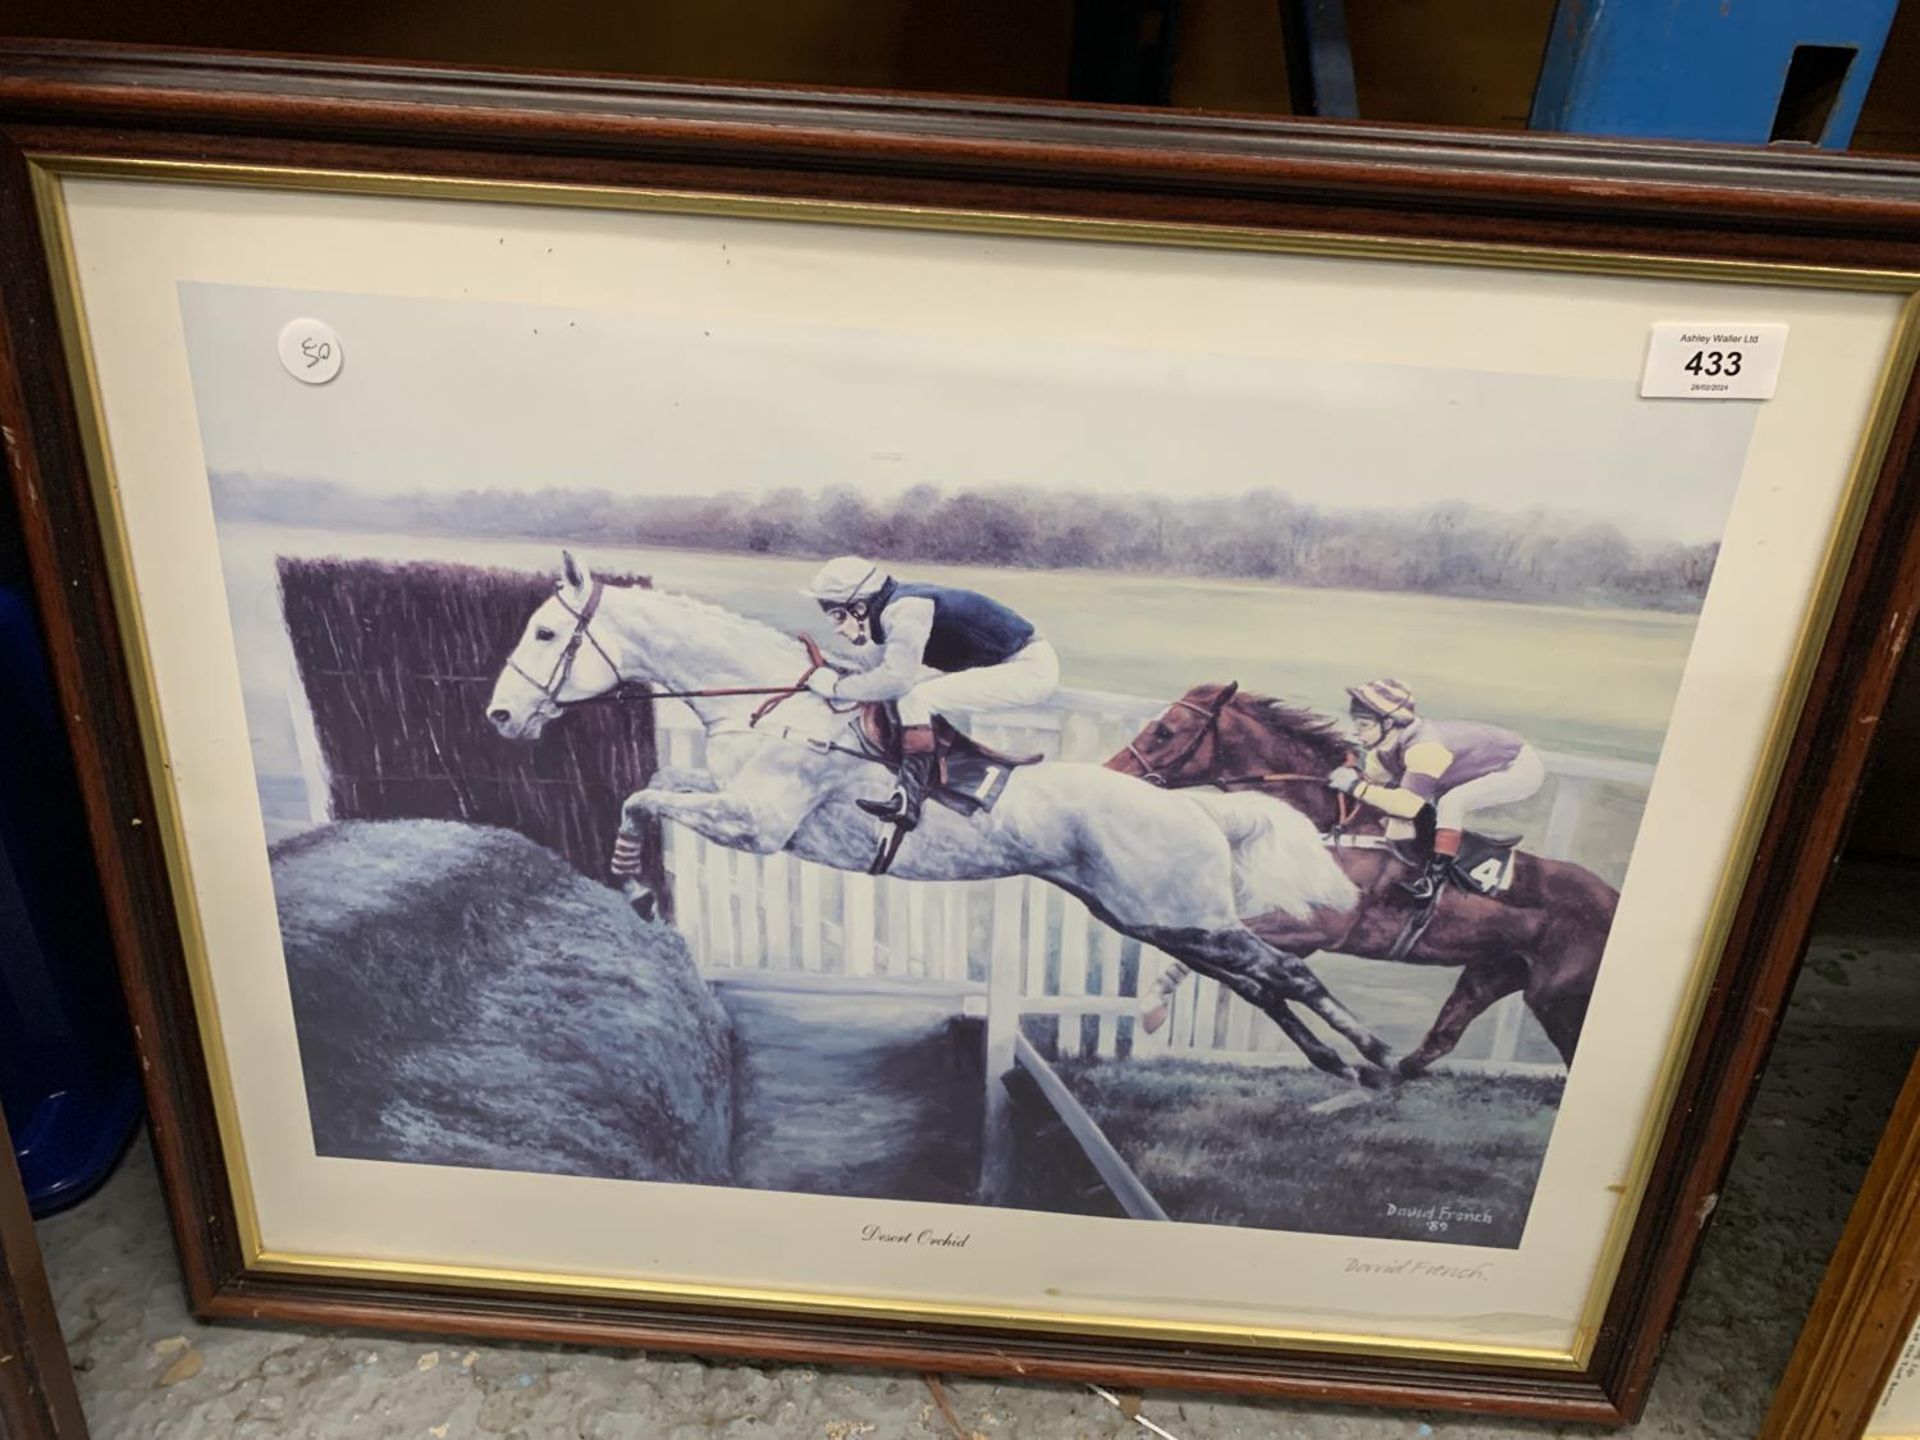 A DESERT ORCHID PRINT, SIGNED IN PENCIL BY ARTIST DAVID FRENCH, 60CM X 50CM